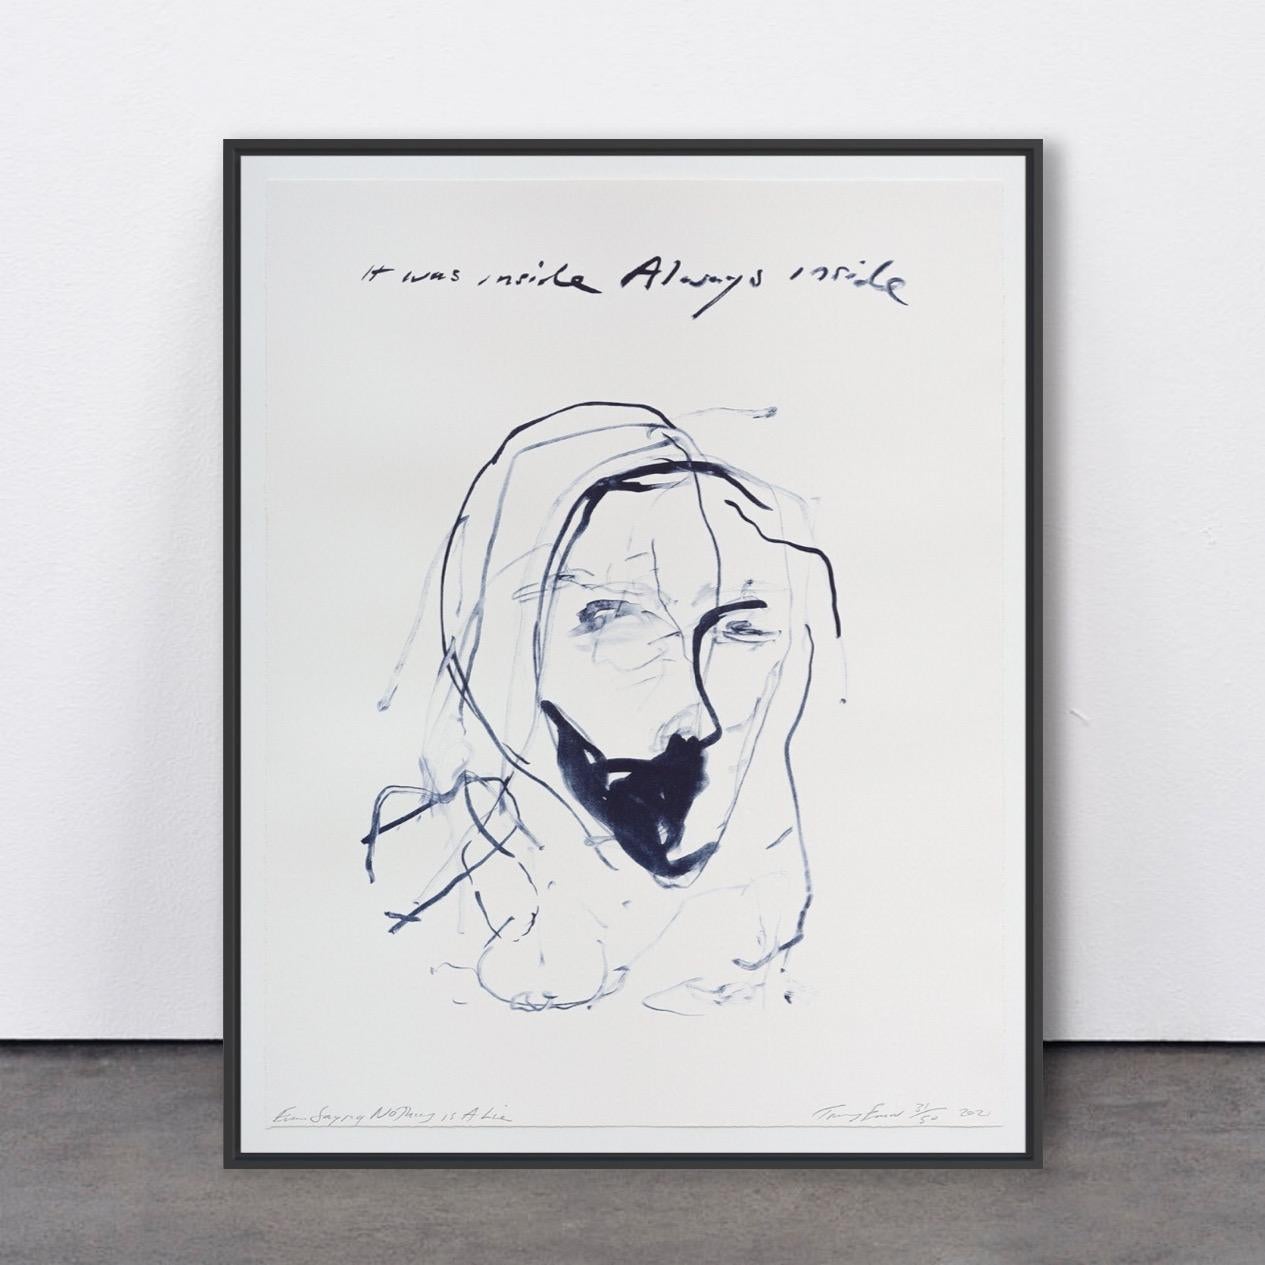 Tracey Emin Figurative Print - Even Saying Nothing Is a Lie, (from A Journey to Death) - Litograph, YBA, Emin 